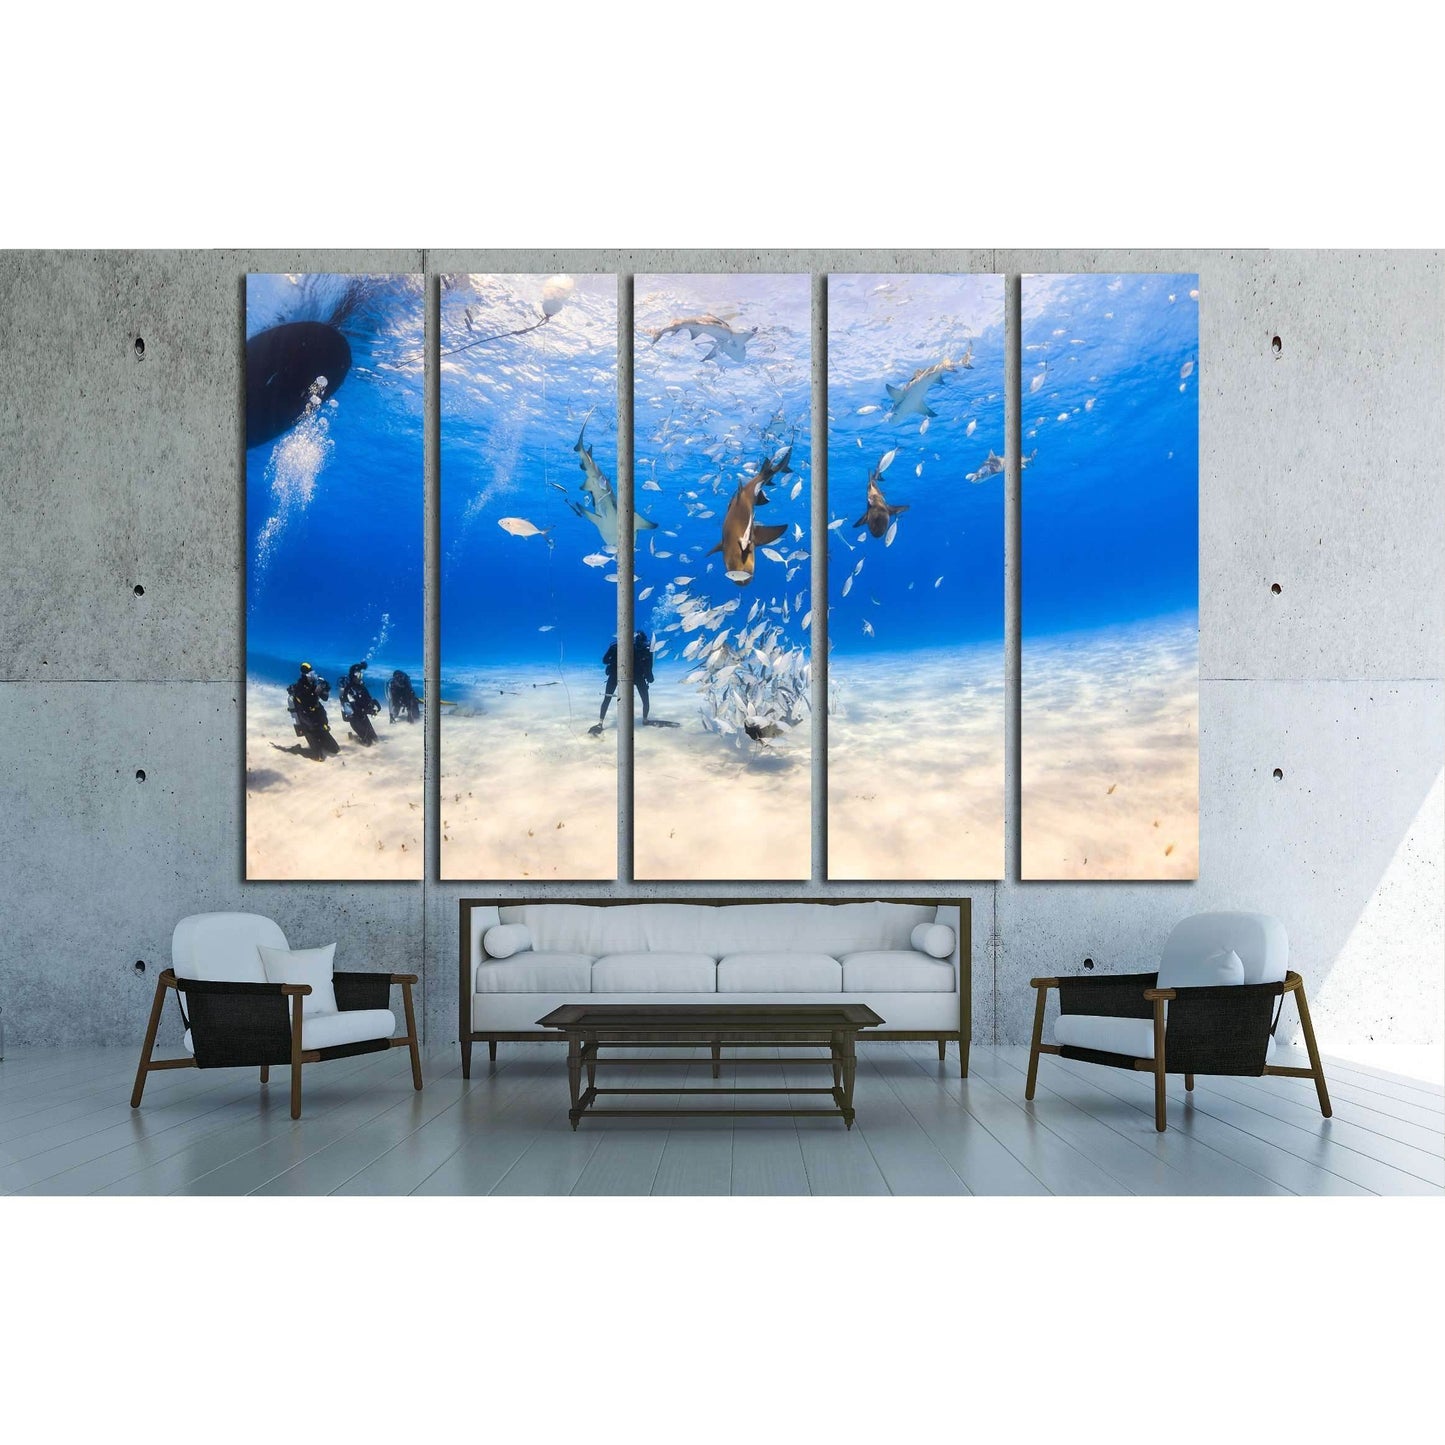 Diver surrounded by Lemon shark and caribbean reef shark on shallow clear water at Tiger beach, Bahamas №2372 Ready to Hang Canvas PrintCanvas art arrives ready to hang, with hanging accessories included and no additional framing required. Every canvas pr